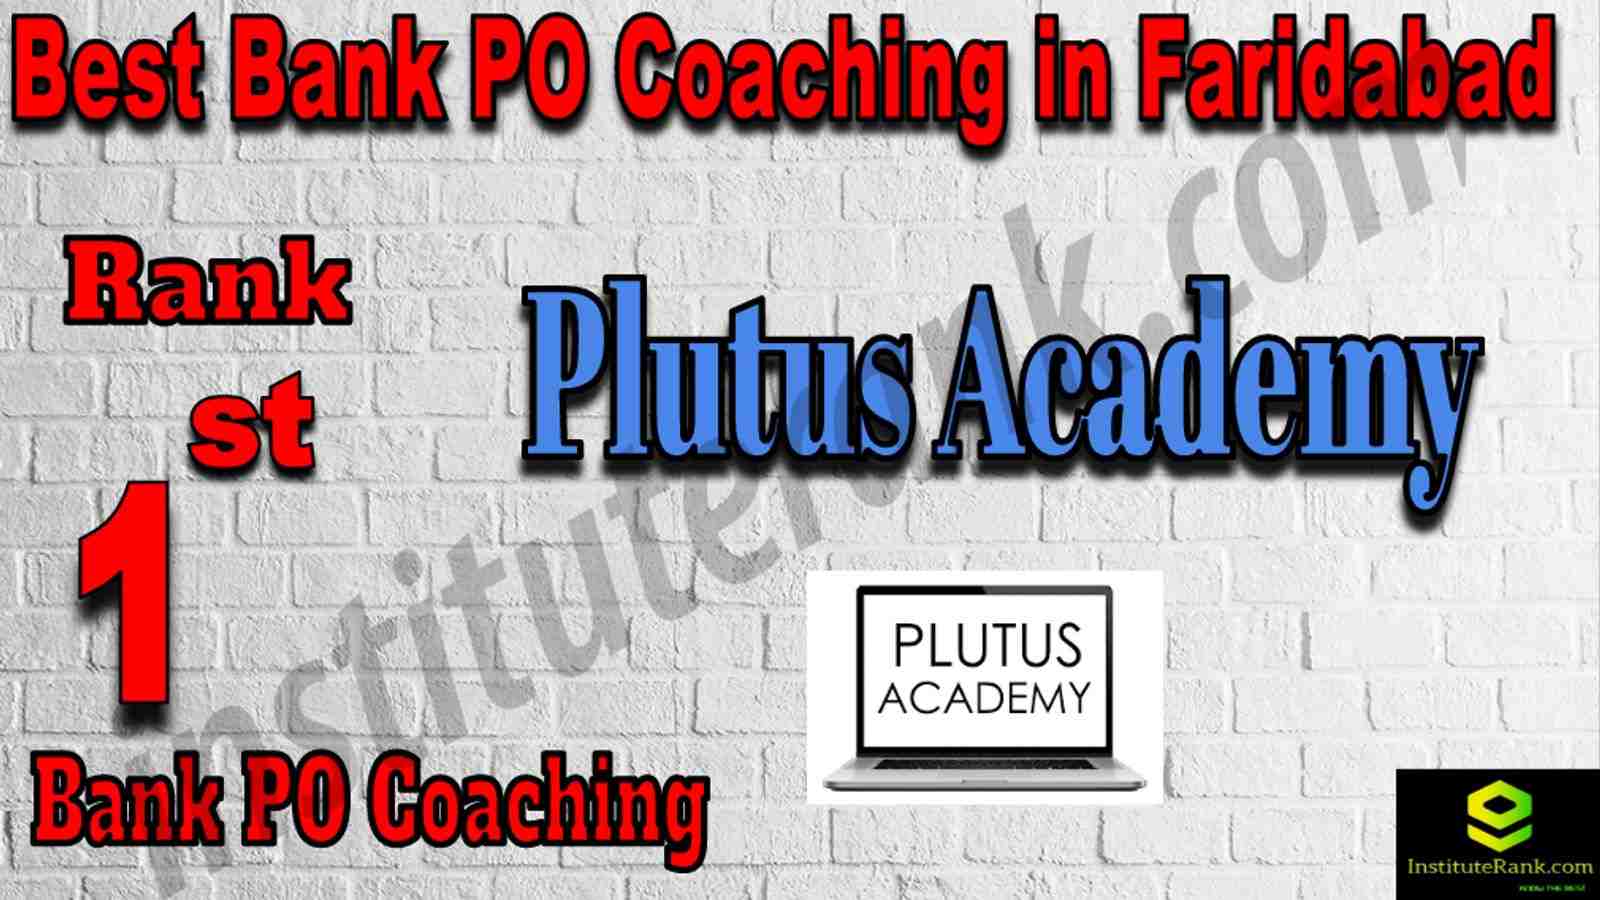 1st Best Bank PO Coaching in Faridabad